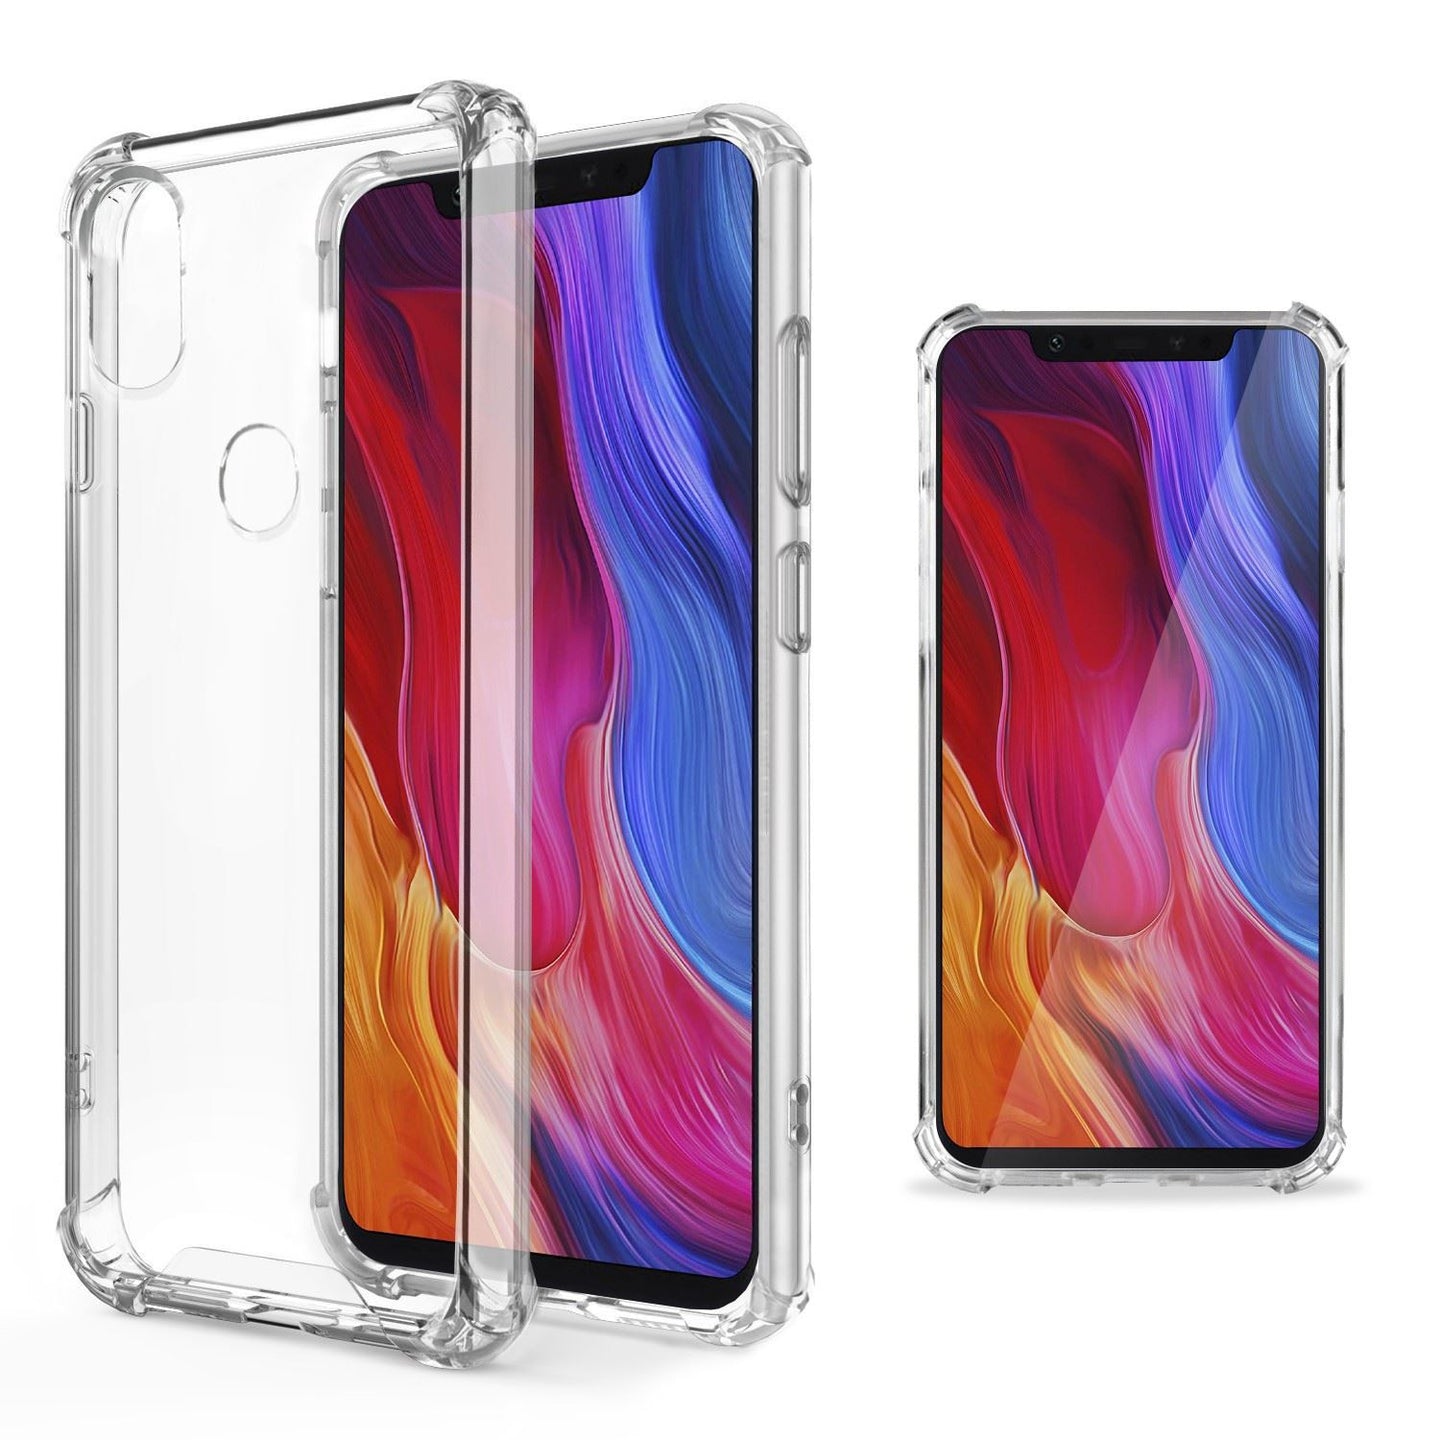 Moozy Shock Proof Silicone Case for Xiaomi Mi 8 - Transparent Crystal Clear Phone Case Soft TPU Cover